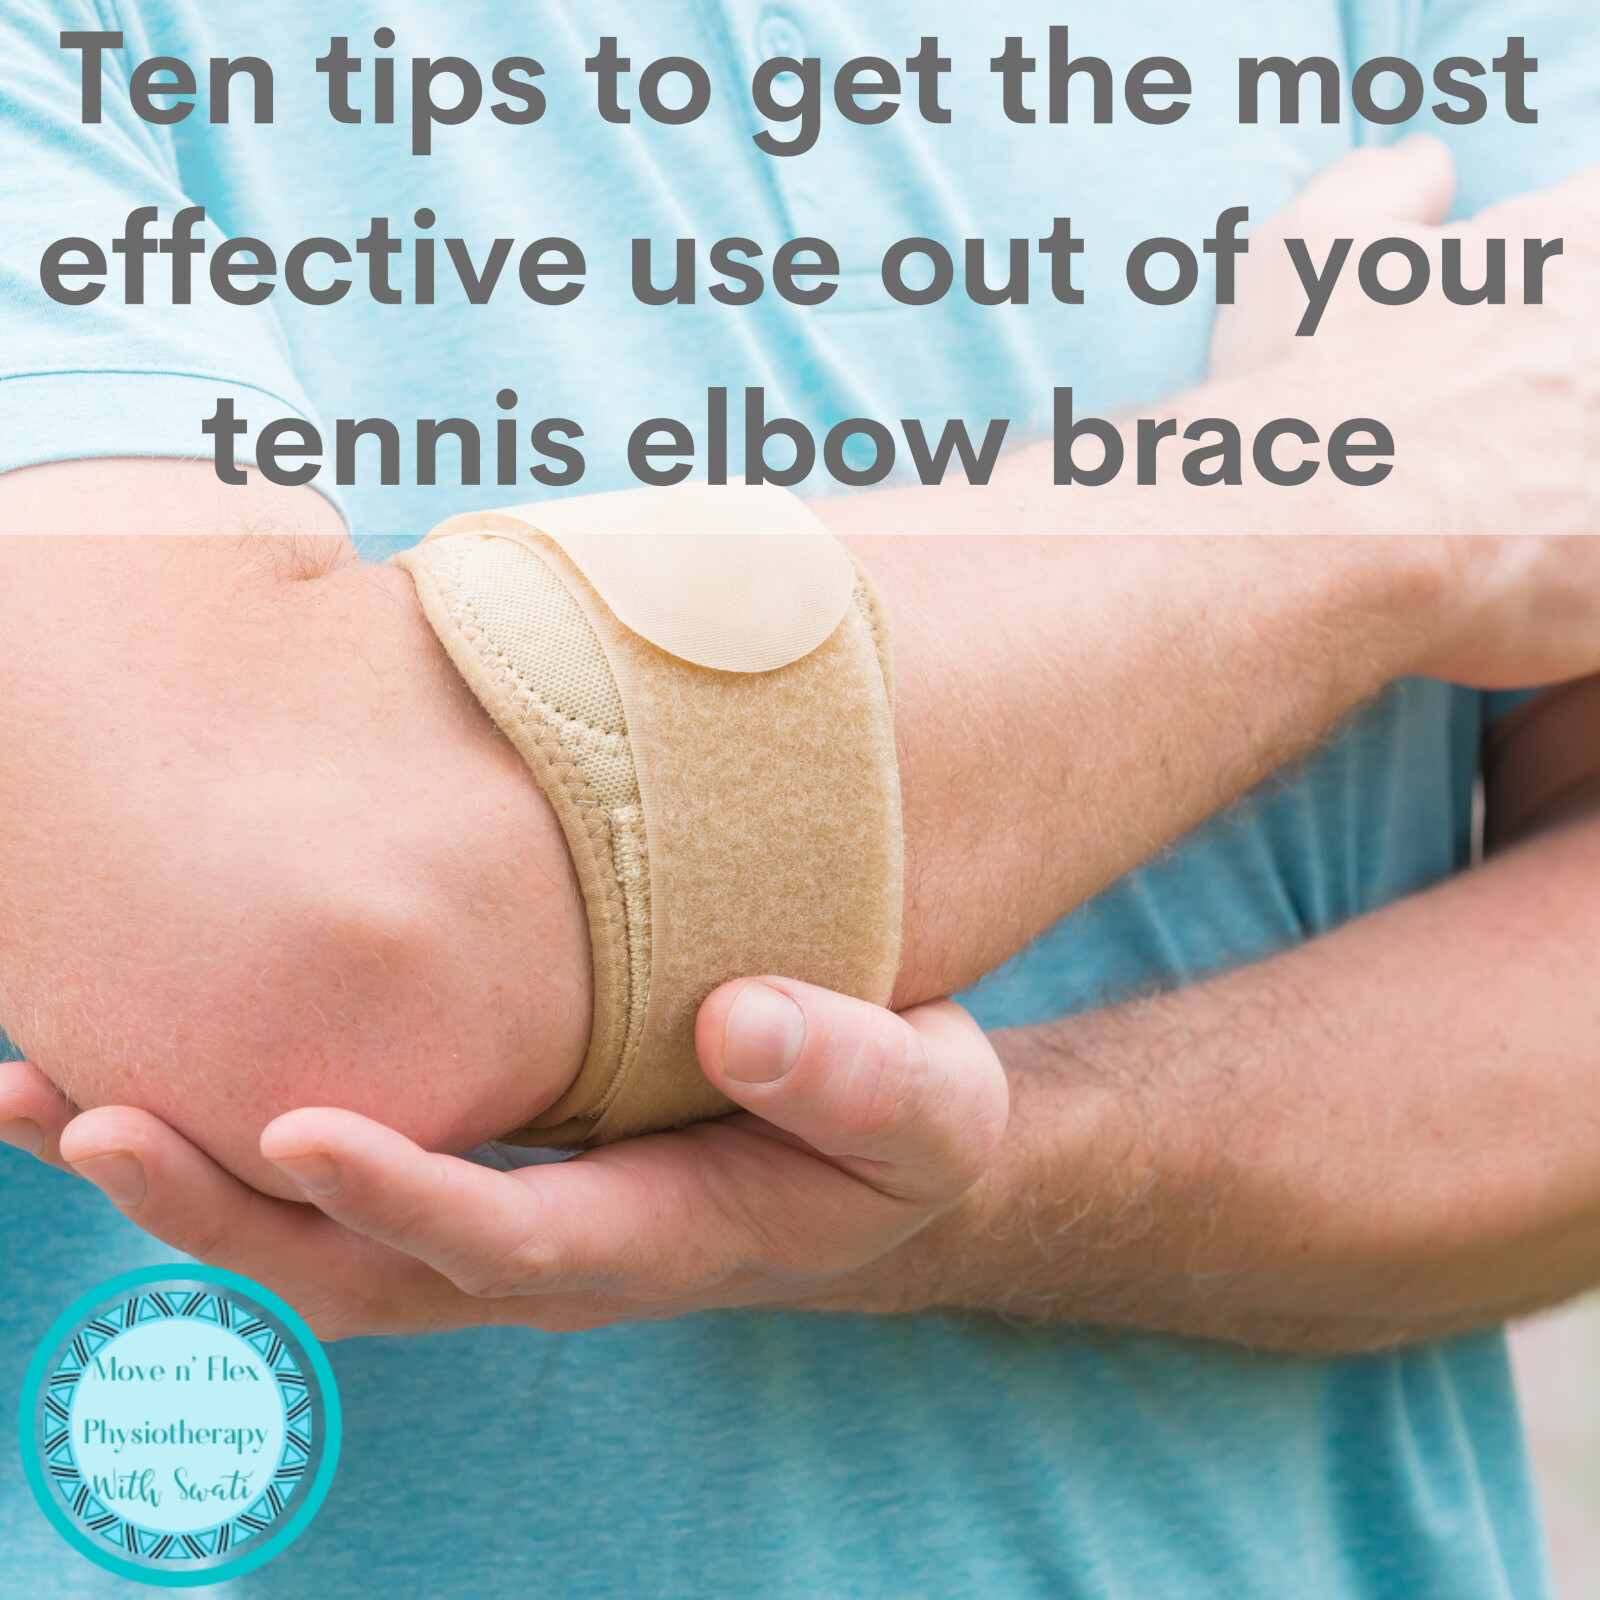 Ten tips to get the most effective use out of your tennis elbow brace